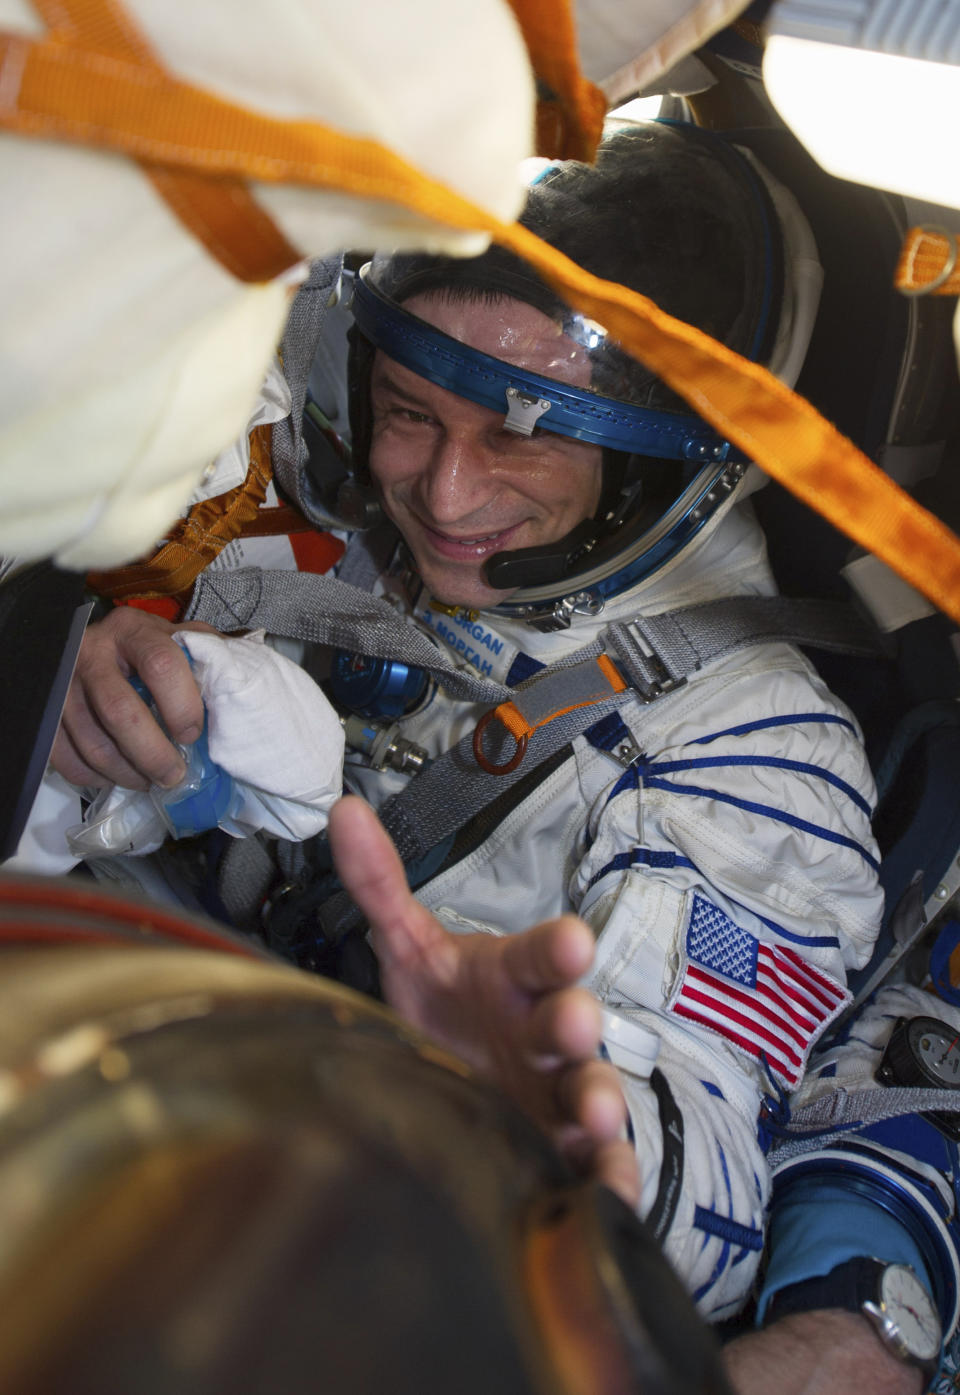 In this handout photo released by Gagarin Cosmonaut Training Centre (GCTC), Roscosmos space agency, U.S. astronaut Jessica Meir sits in the capsule shortly after the landing of the Russian Soyuz MS-15 space capsule near Kazakh town of Dzhezkazgan, Kazakhstan, Friday, April 17, 2020. An International Space Station crew has landed safely after more than 200 days in space. The Soyuz capsule carrying NASA astronauts Andrew Morgan, Jessica Meir and Russian space agency Roscosmos' Oleg Skripochka touched down on Friday on the steppes of Kazakhstan. (Andrey Shelepin, Gagarin Cosmonaut Training Centre (GCTC), Roscosmos space agency, via AP)